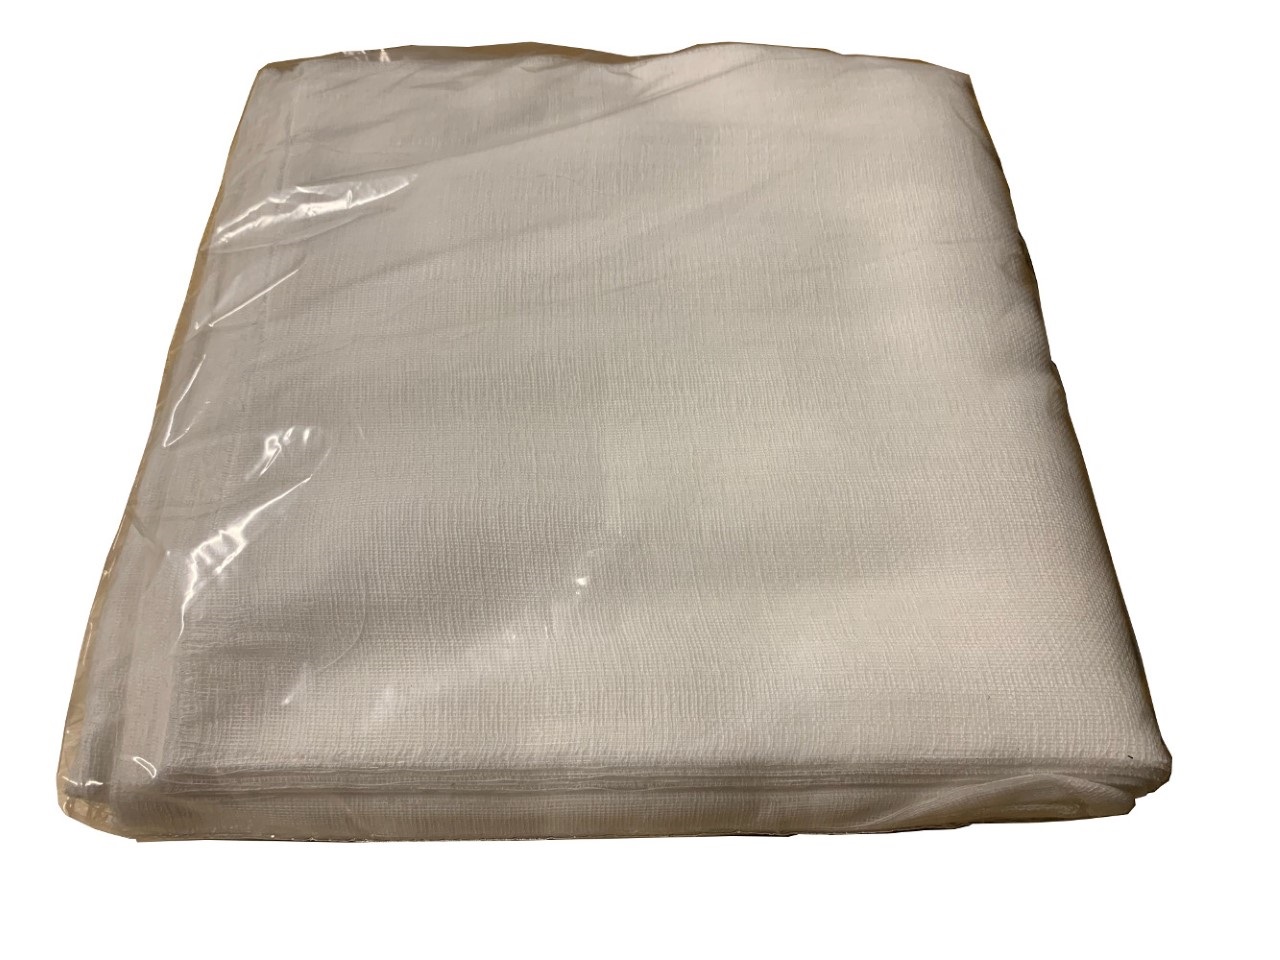 Grade 50 Bagged Cheesecloth 10" x 20" - 100 Pack (Bleached)